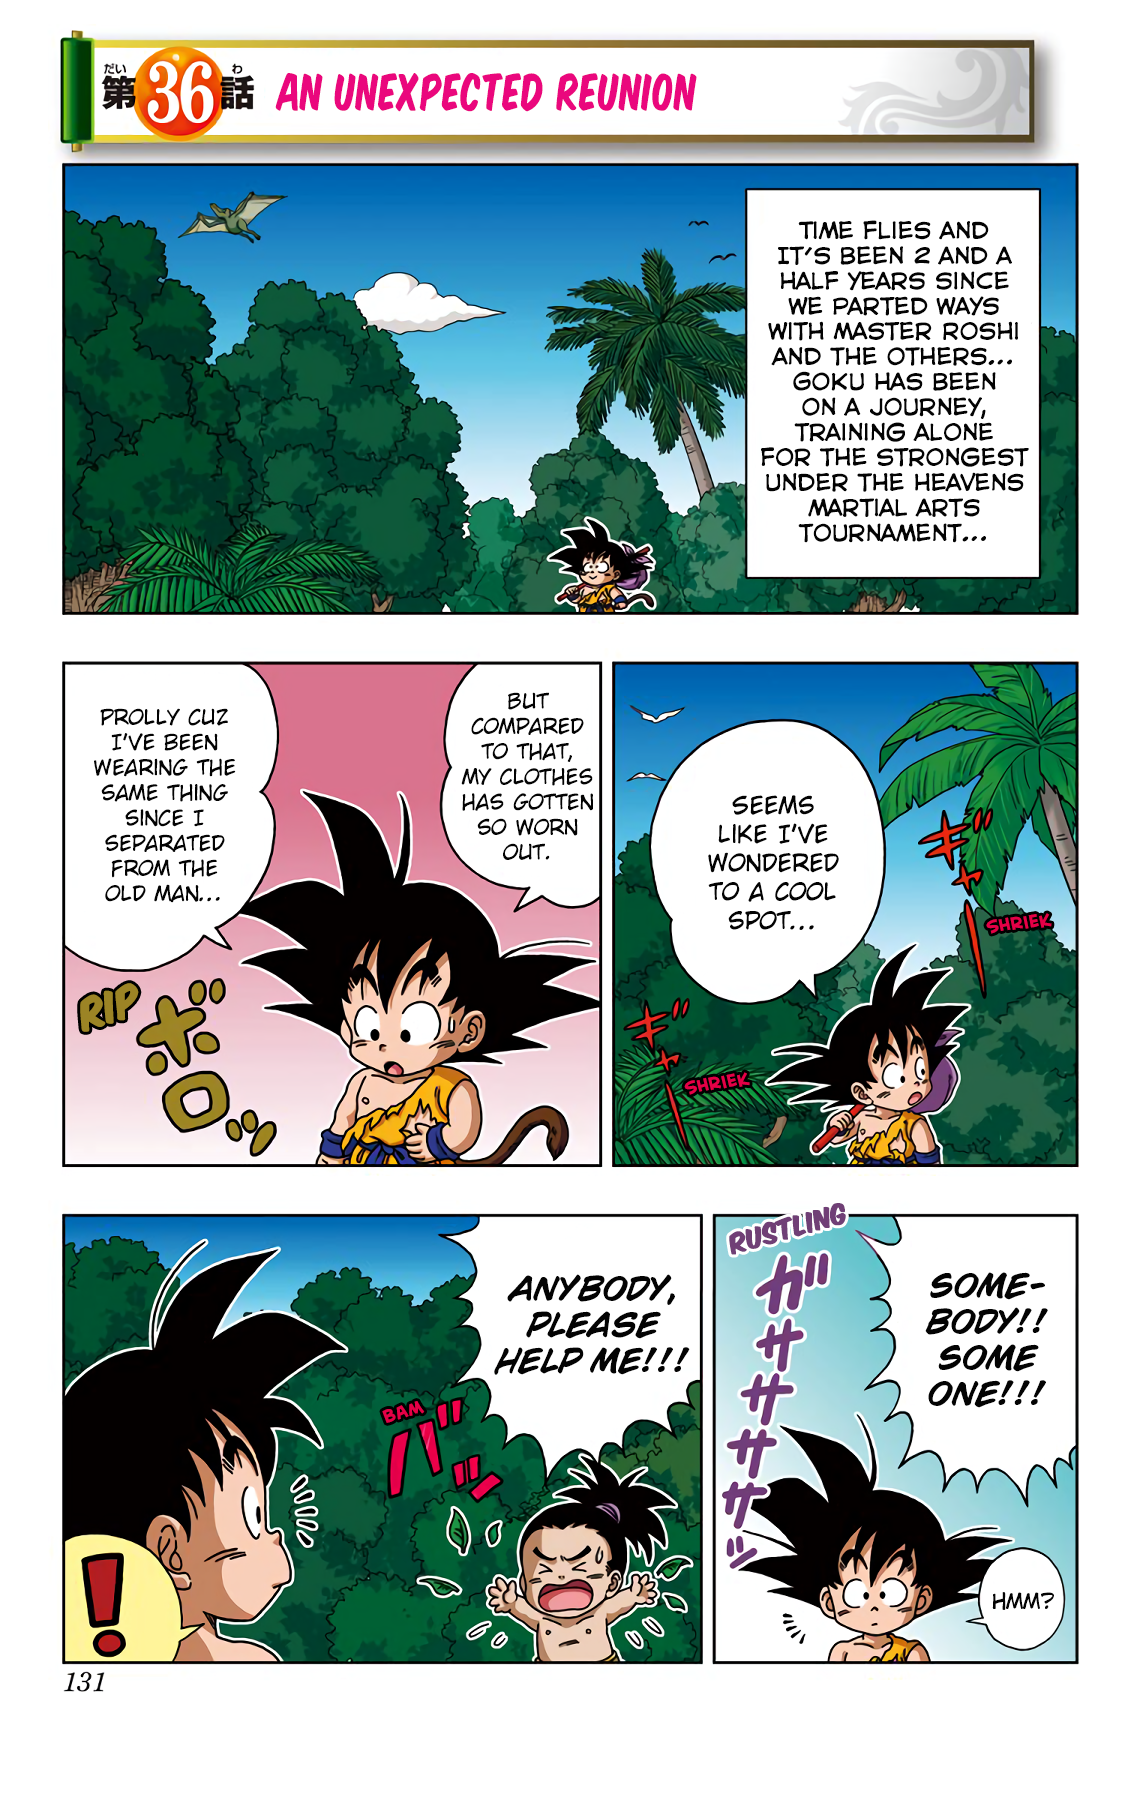 Dragon Ball Sd Vol.4 Chapter 36: An Unexpected Reunion - Picture 1